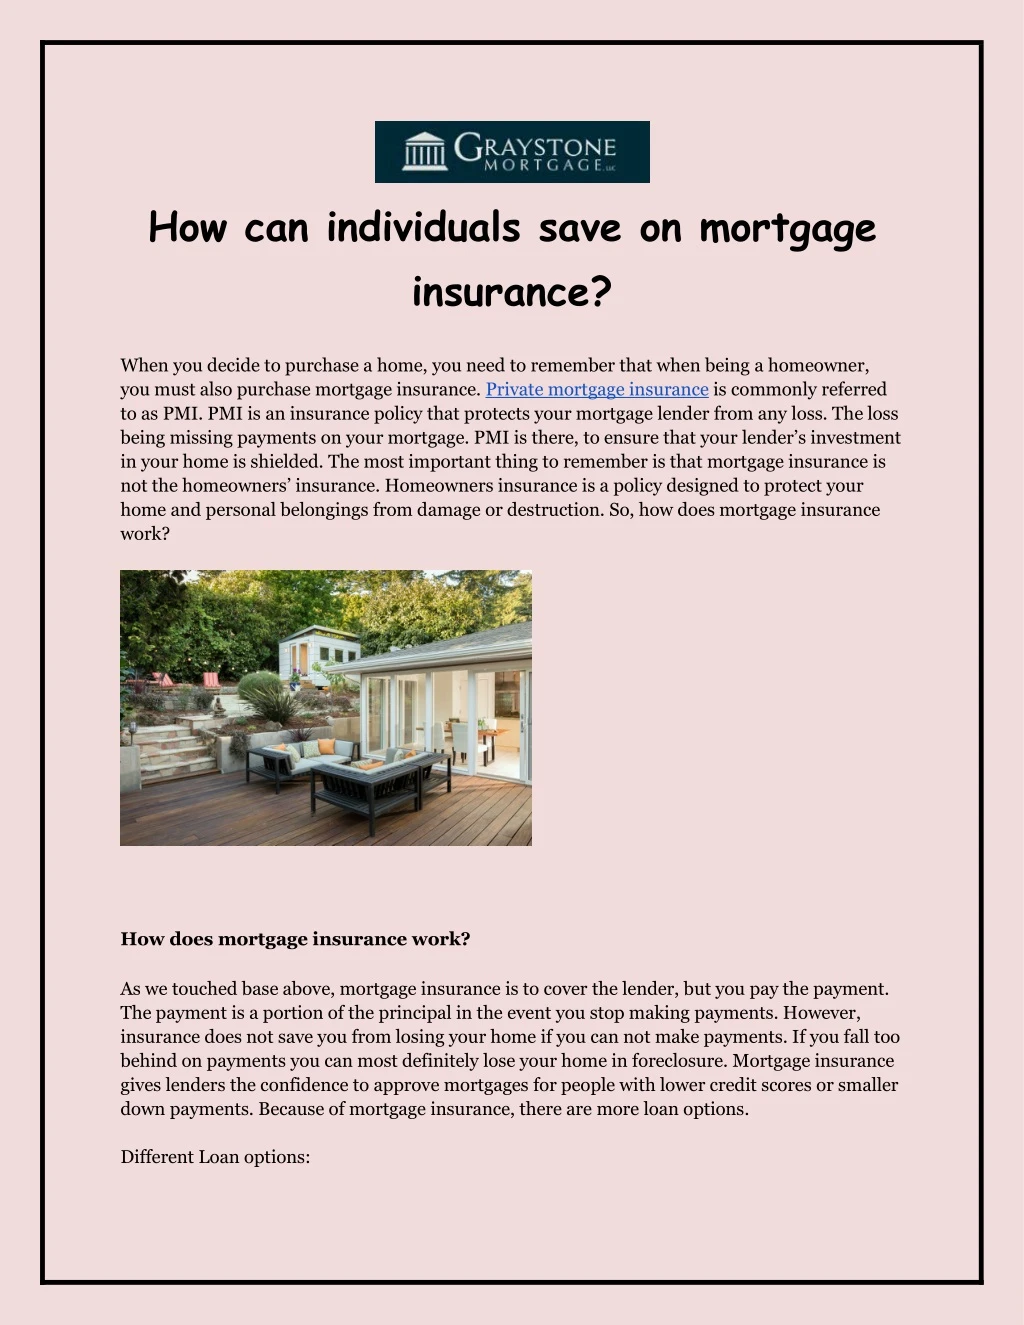 how can individuals save on mortgage insurance